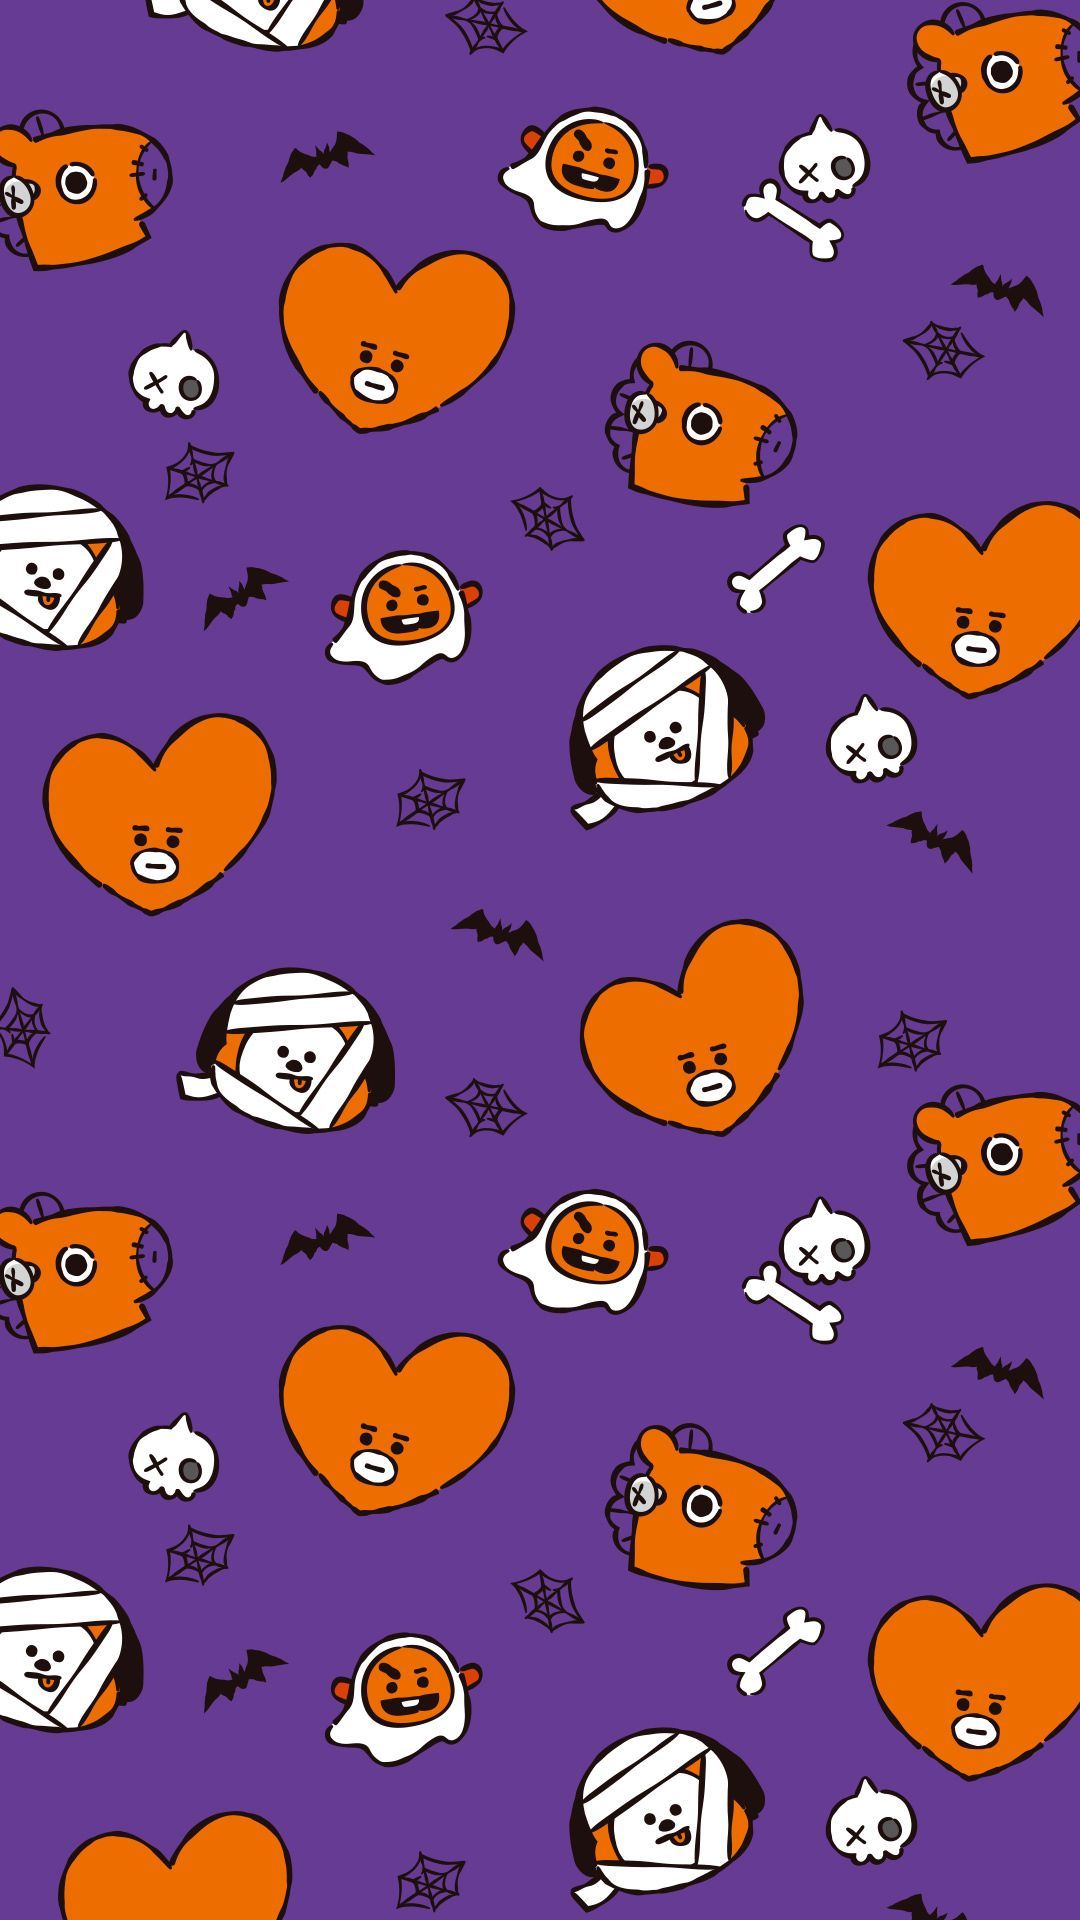 LINEFRIENDS PIC. GIFs, pics and wallpaper by LINE friends. Bts halloween, Halloween wallpaper, Line friends